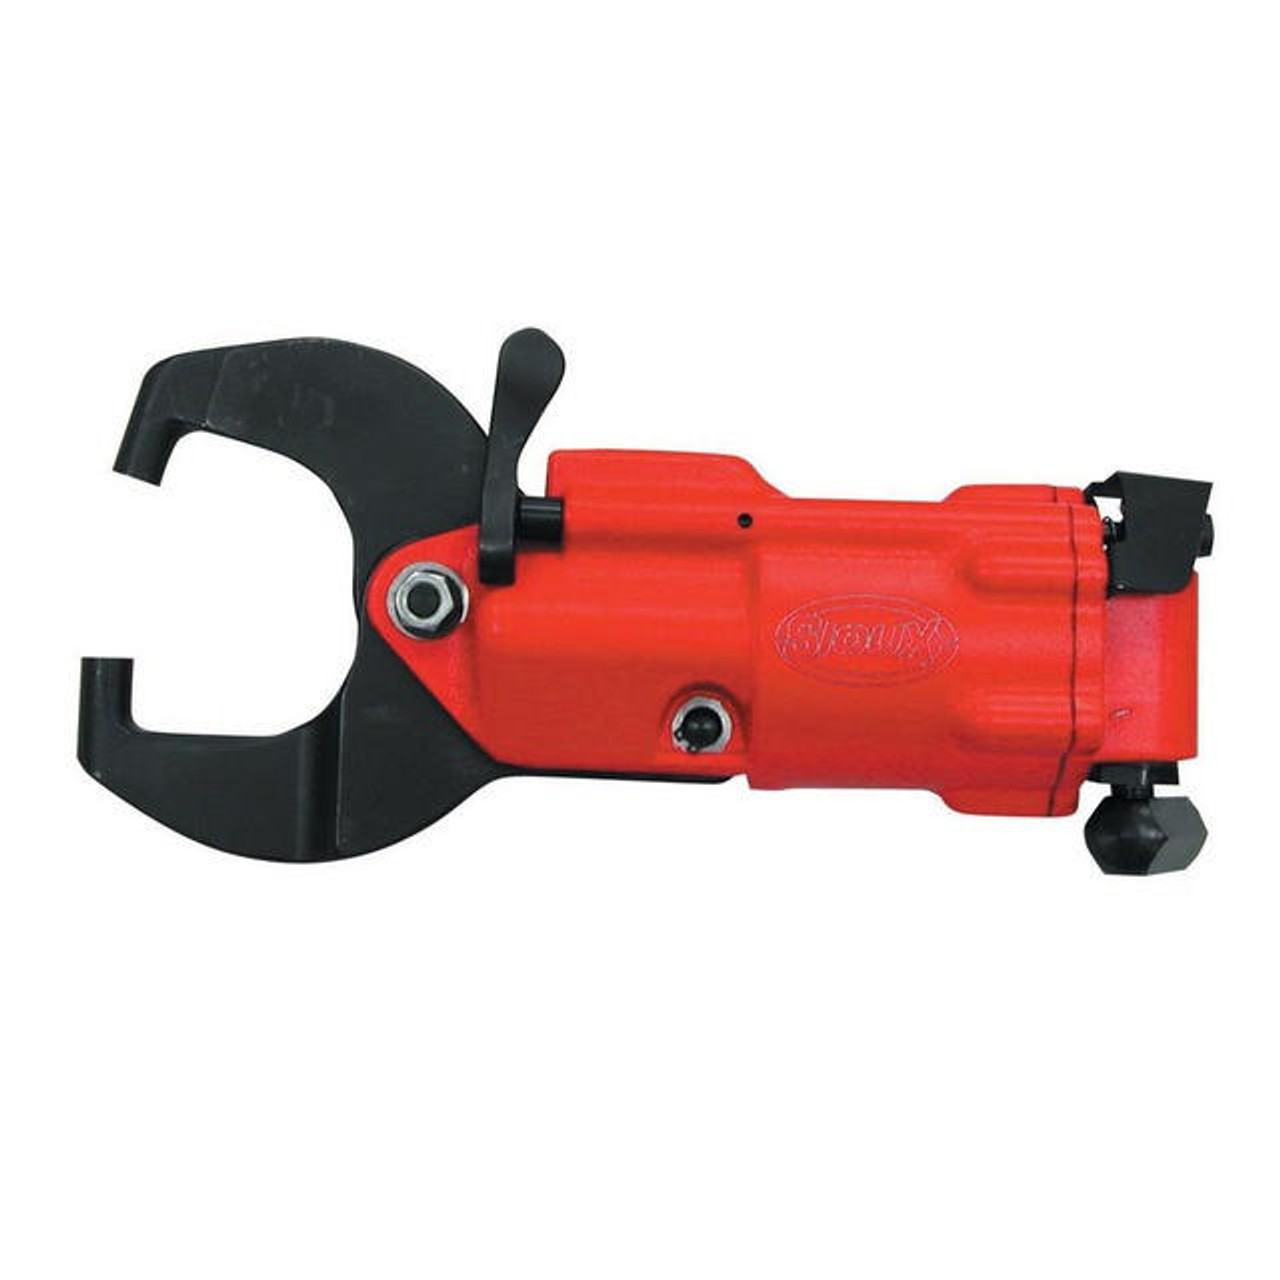  Sioux Tools SZEA5015 Alligator Squeezer Compression Riveter | 3,000 lbs Force | 1 1/2" Reach 